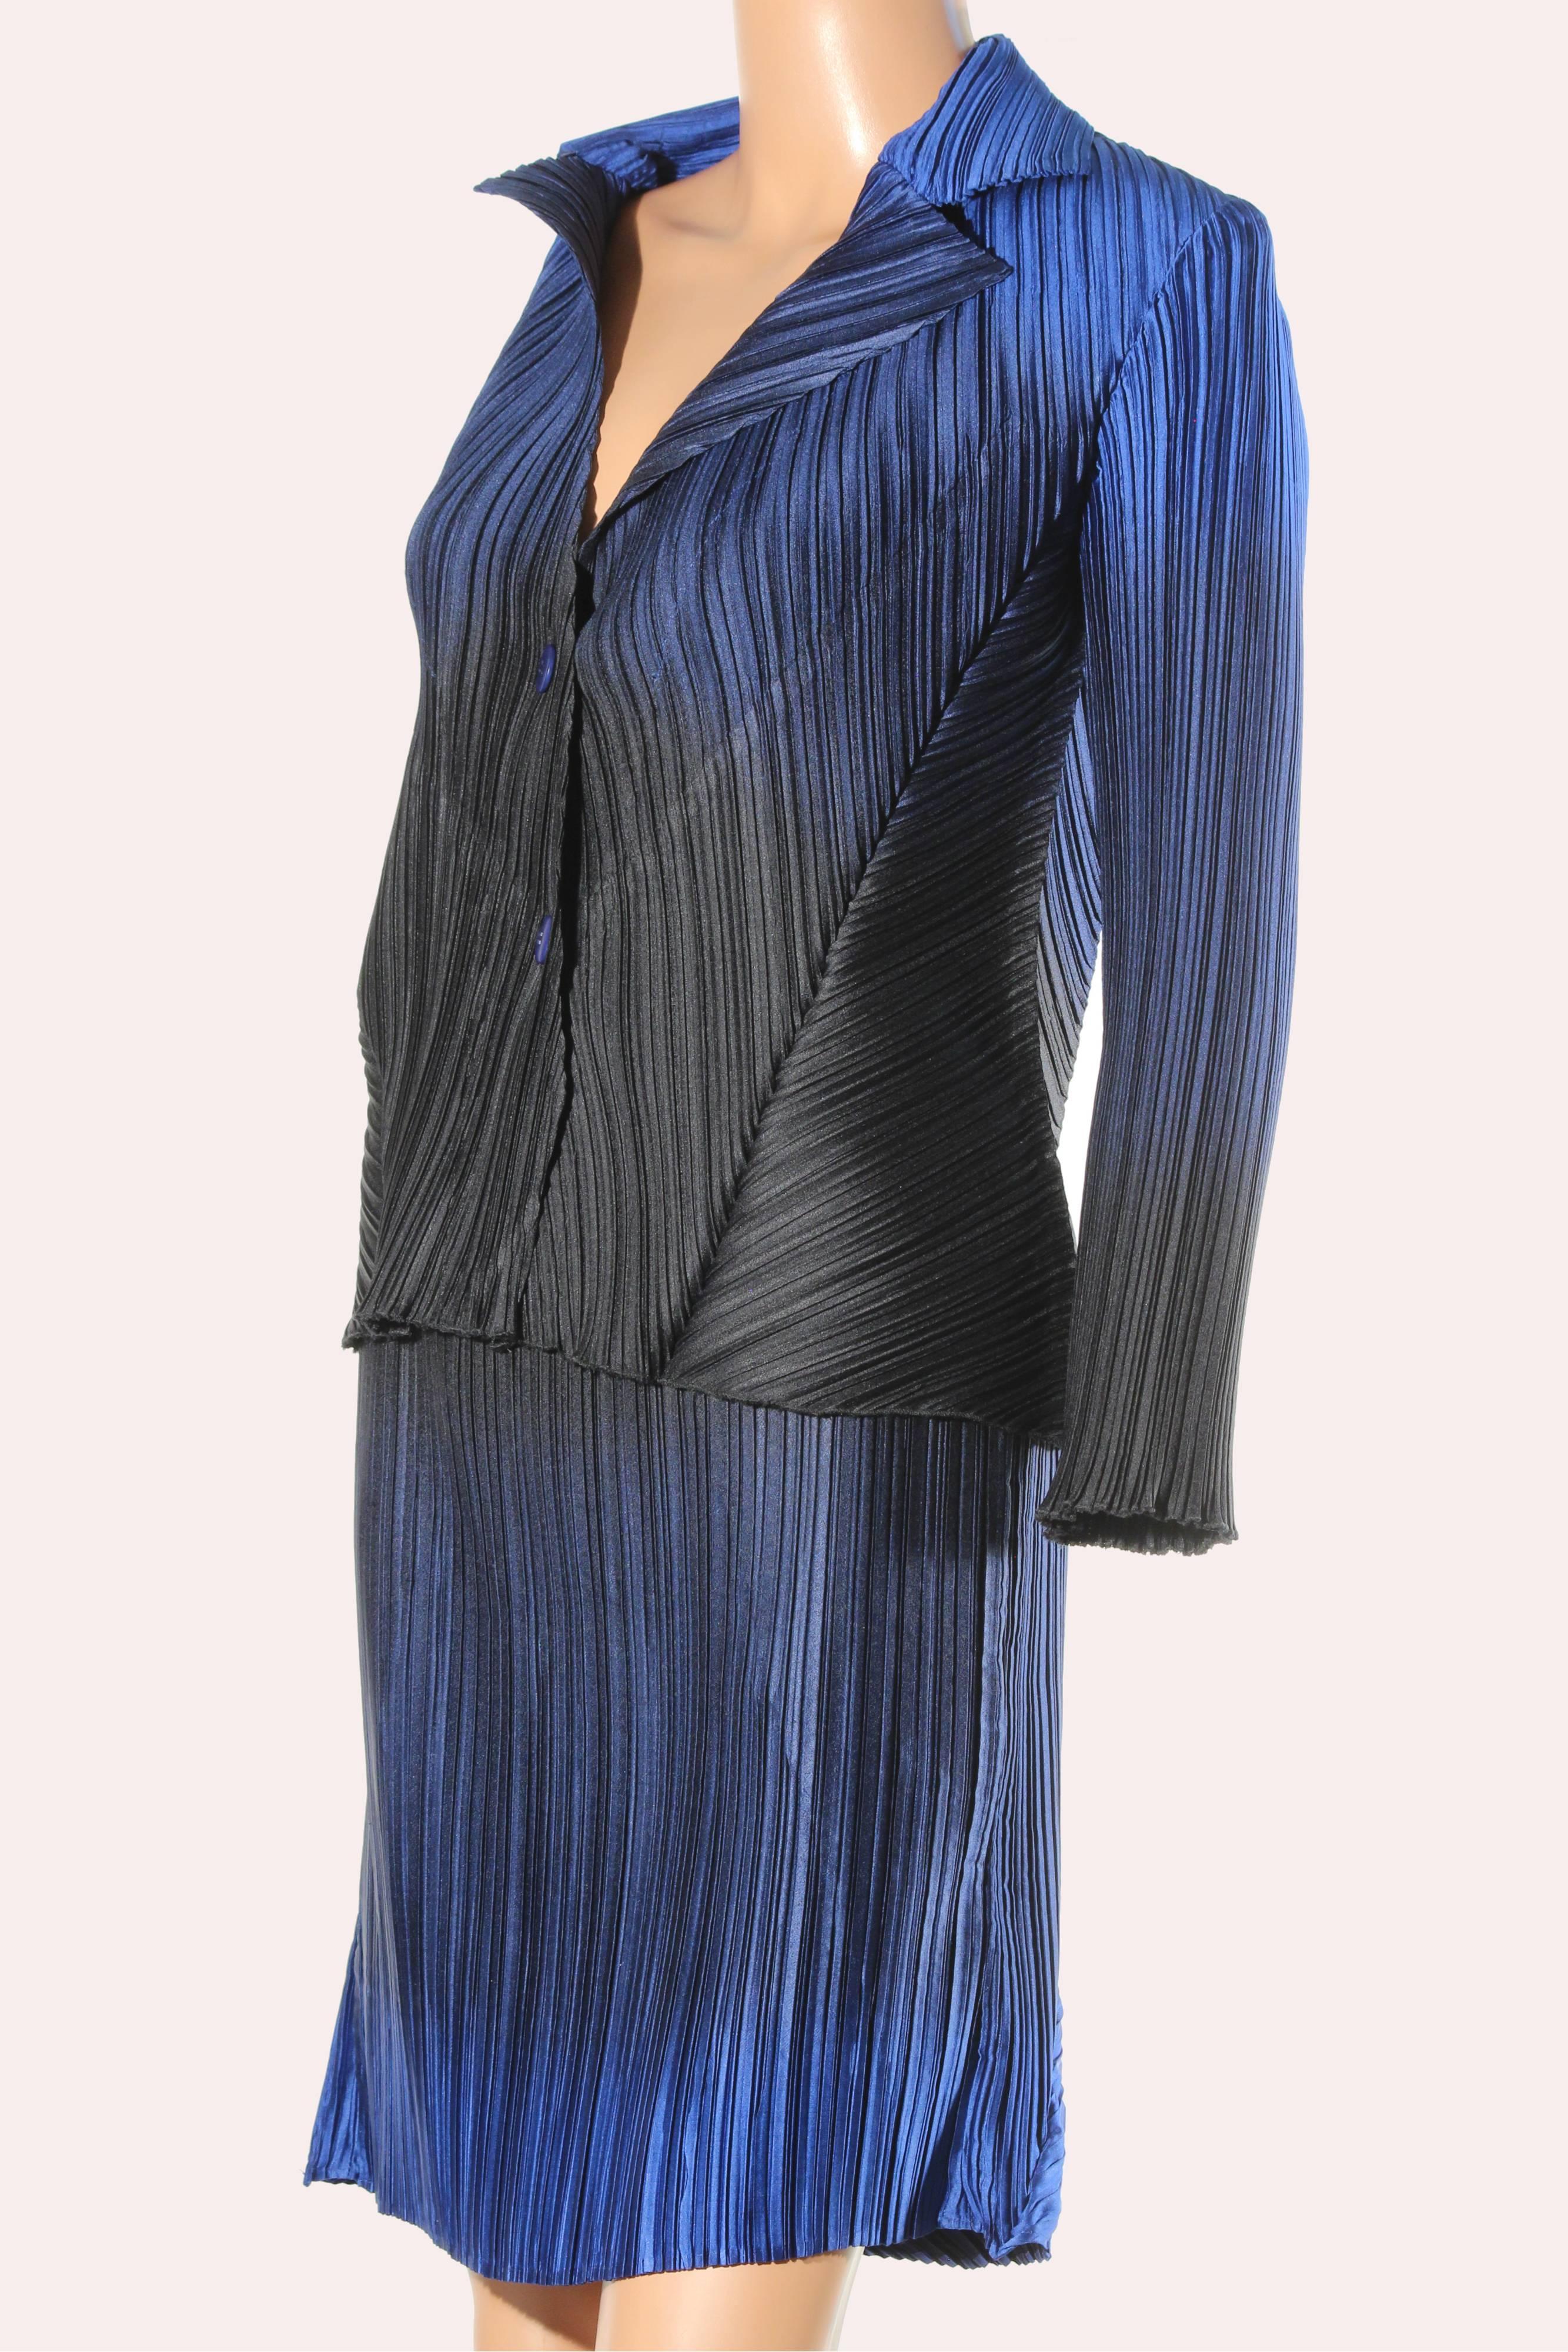 Issey Miyake Blue Ombre Micro Pleated Jacket and Skirt Suit Ensemble Japan Sz 2  3